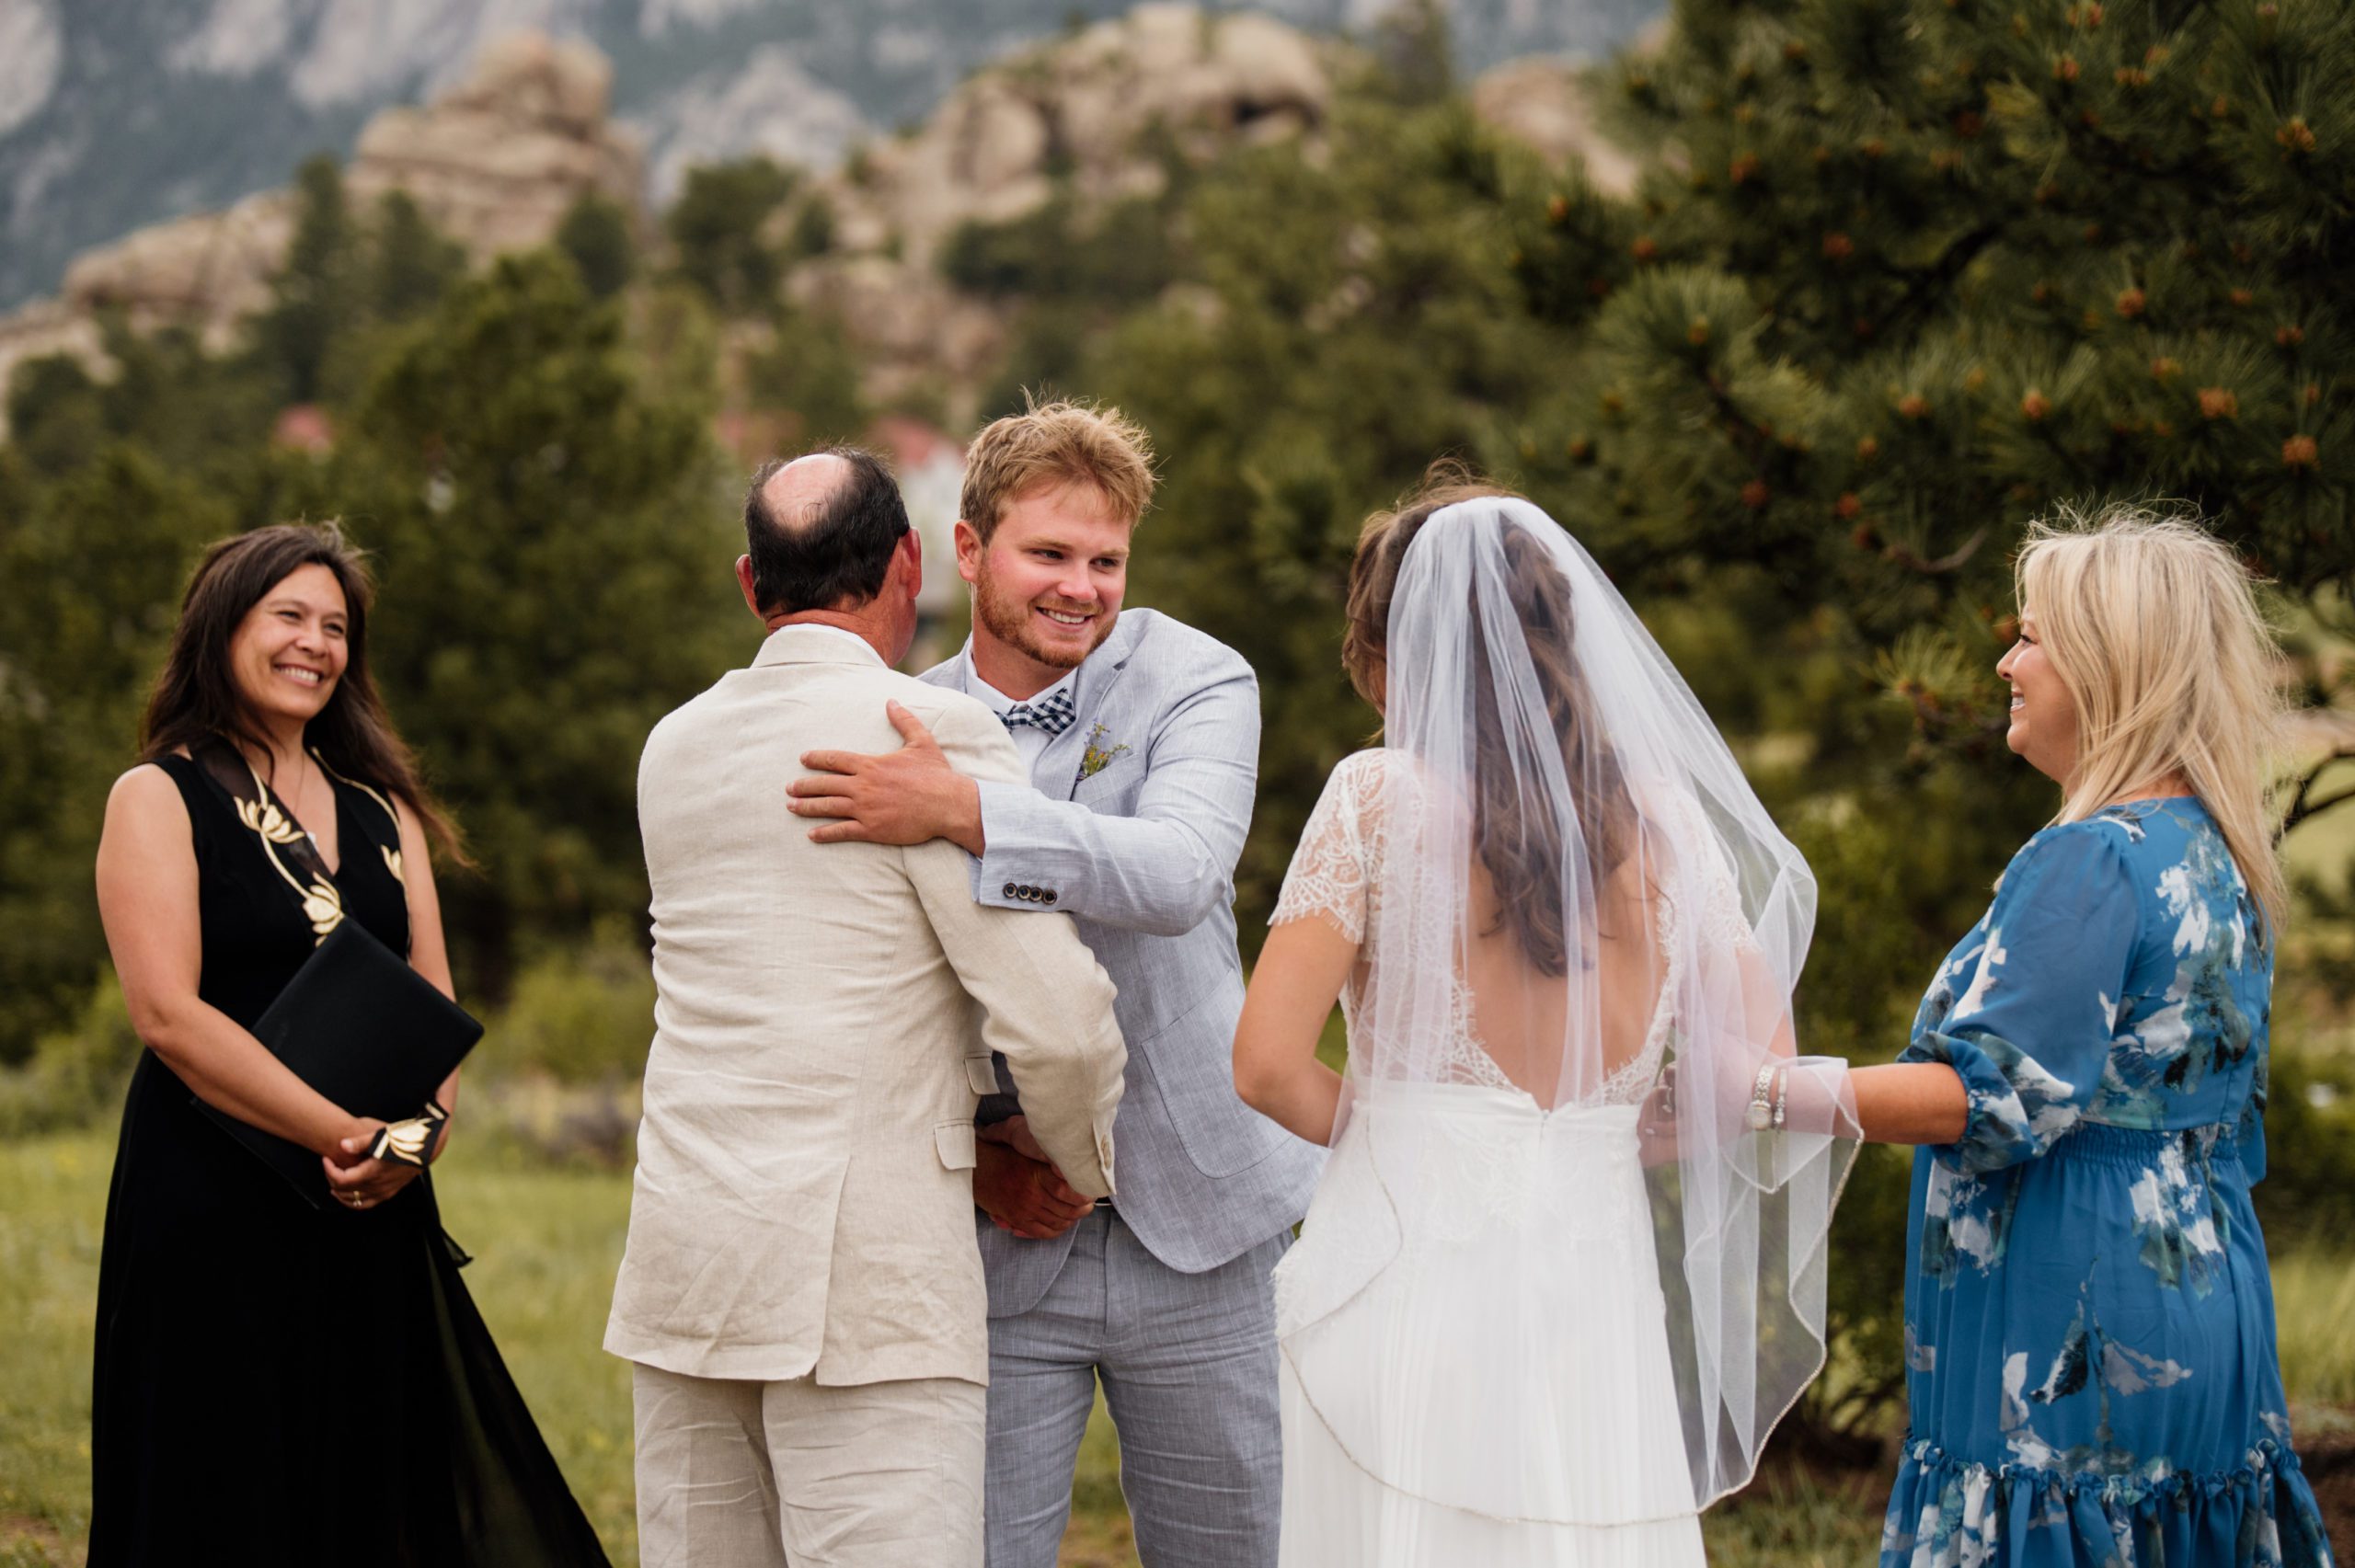 The groom hugs his bride's dad at the end of the aisle before their ceremony at The bride walks down the path towards her groom at their Knoll Willows elopement in Estes Park.